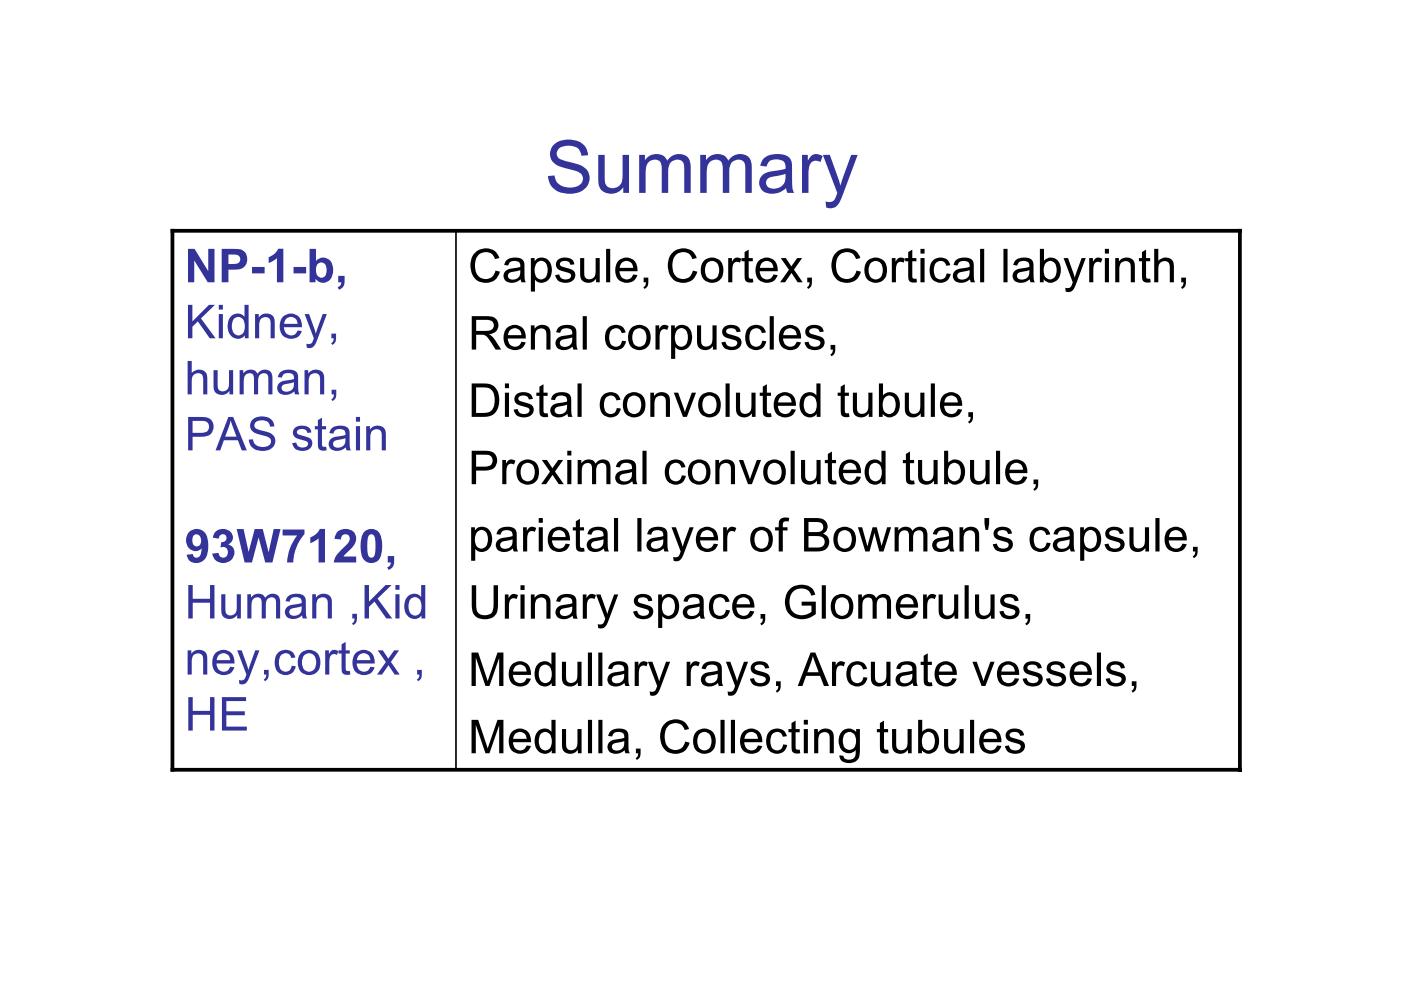 block8_29.jpg - SummaryNP-1-b, Kidney, human, PAS stain   93W7120, Human ,Kidney,cortex, HE Capsule, Cortex, Cortical labyrinth,Renal corpuscles,Distal convoluted tubule,Proximal convoluted tubule,parietal layer of Bowman's capsule,Urinary space, Glomerulus,Medullary rays, Arcuate vessels,Medulla, Collecting tubules